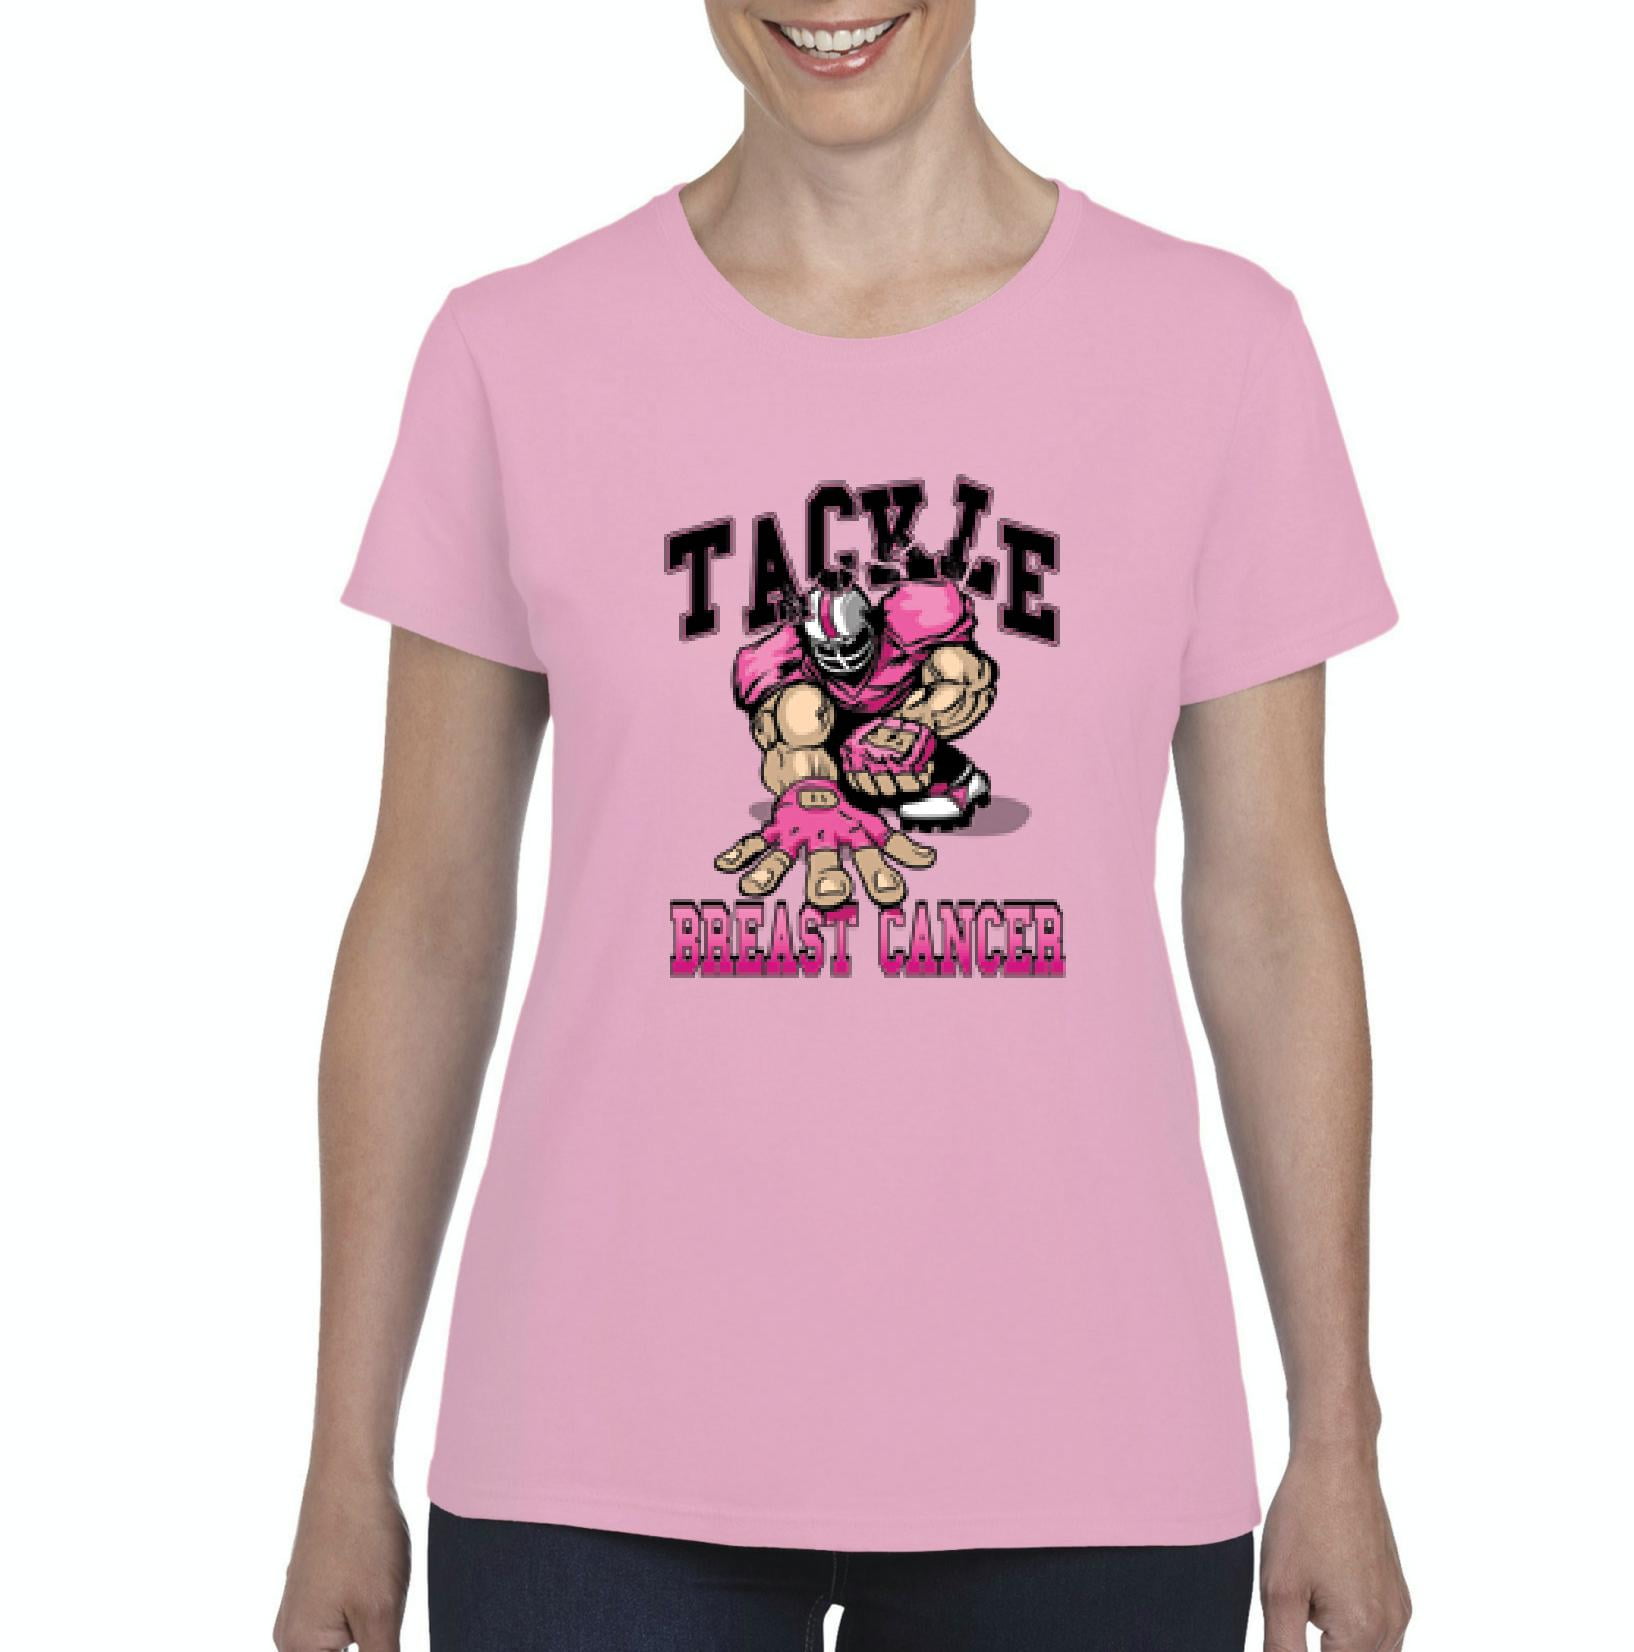 Ladies T shirt Womens Breast Cancer Awareness Pink Ribbon Charity Hell Yes